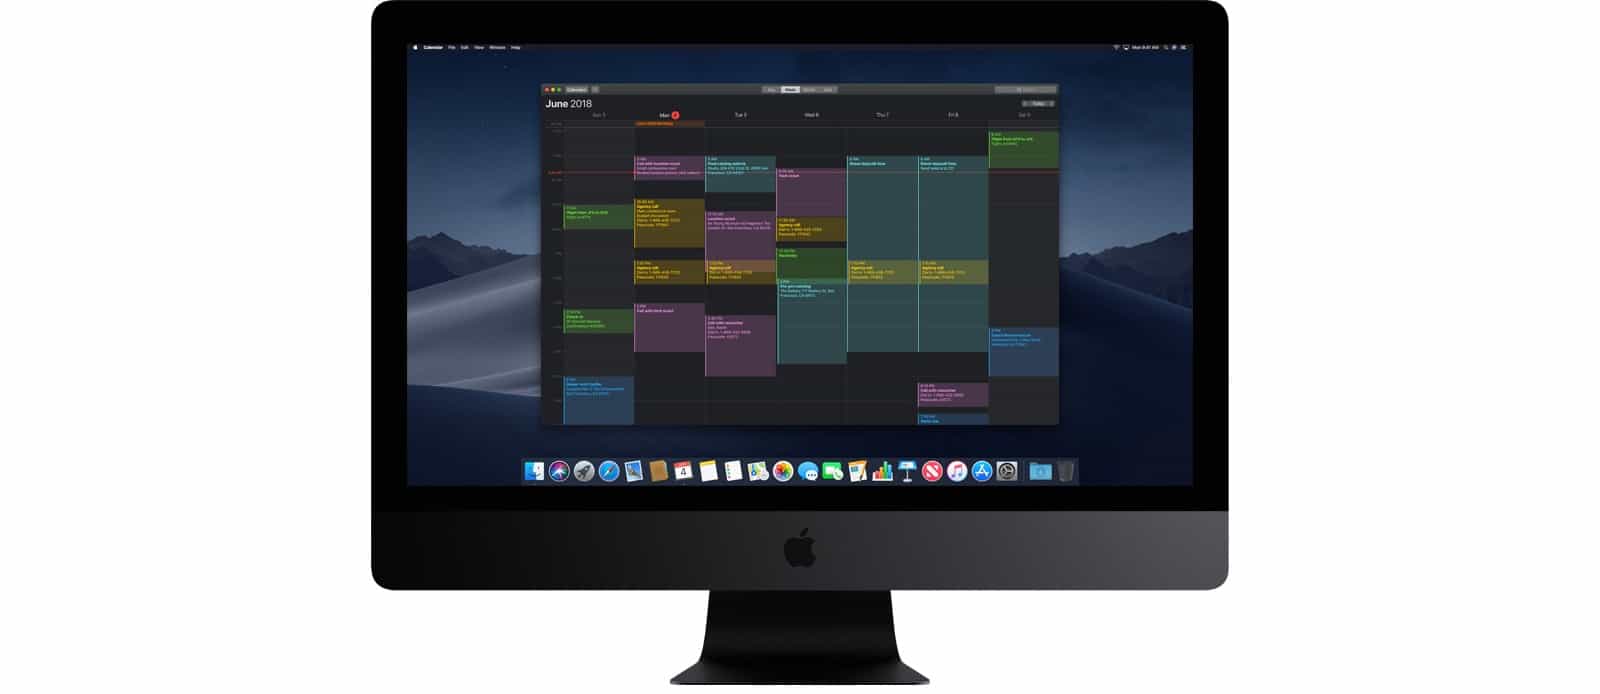 Is your Mac too old to run dark mode? Maybe!